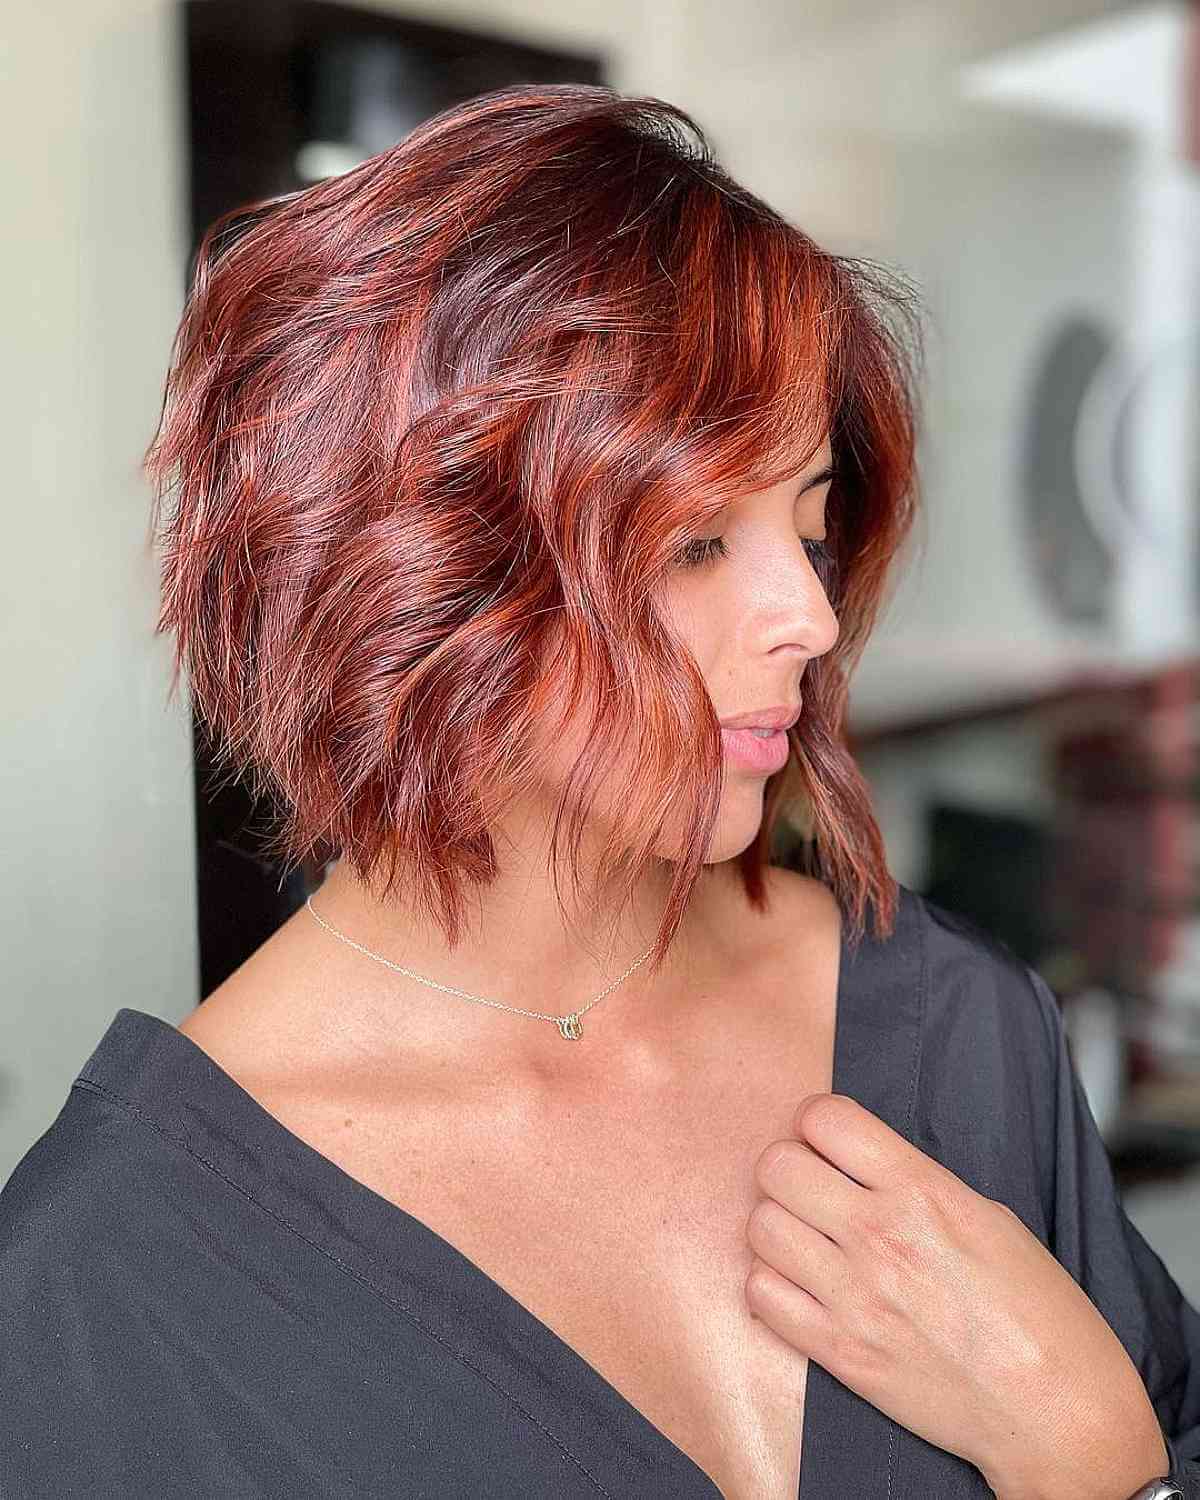 Short Angled Bob Cut with Textured Waves for Thick Hair